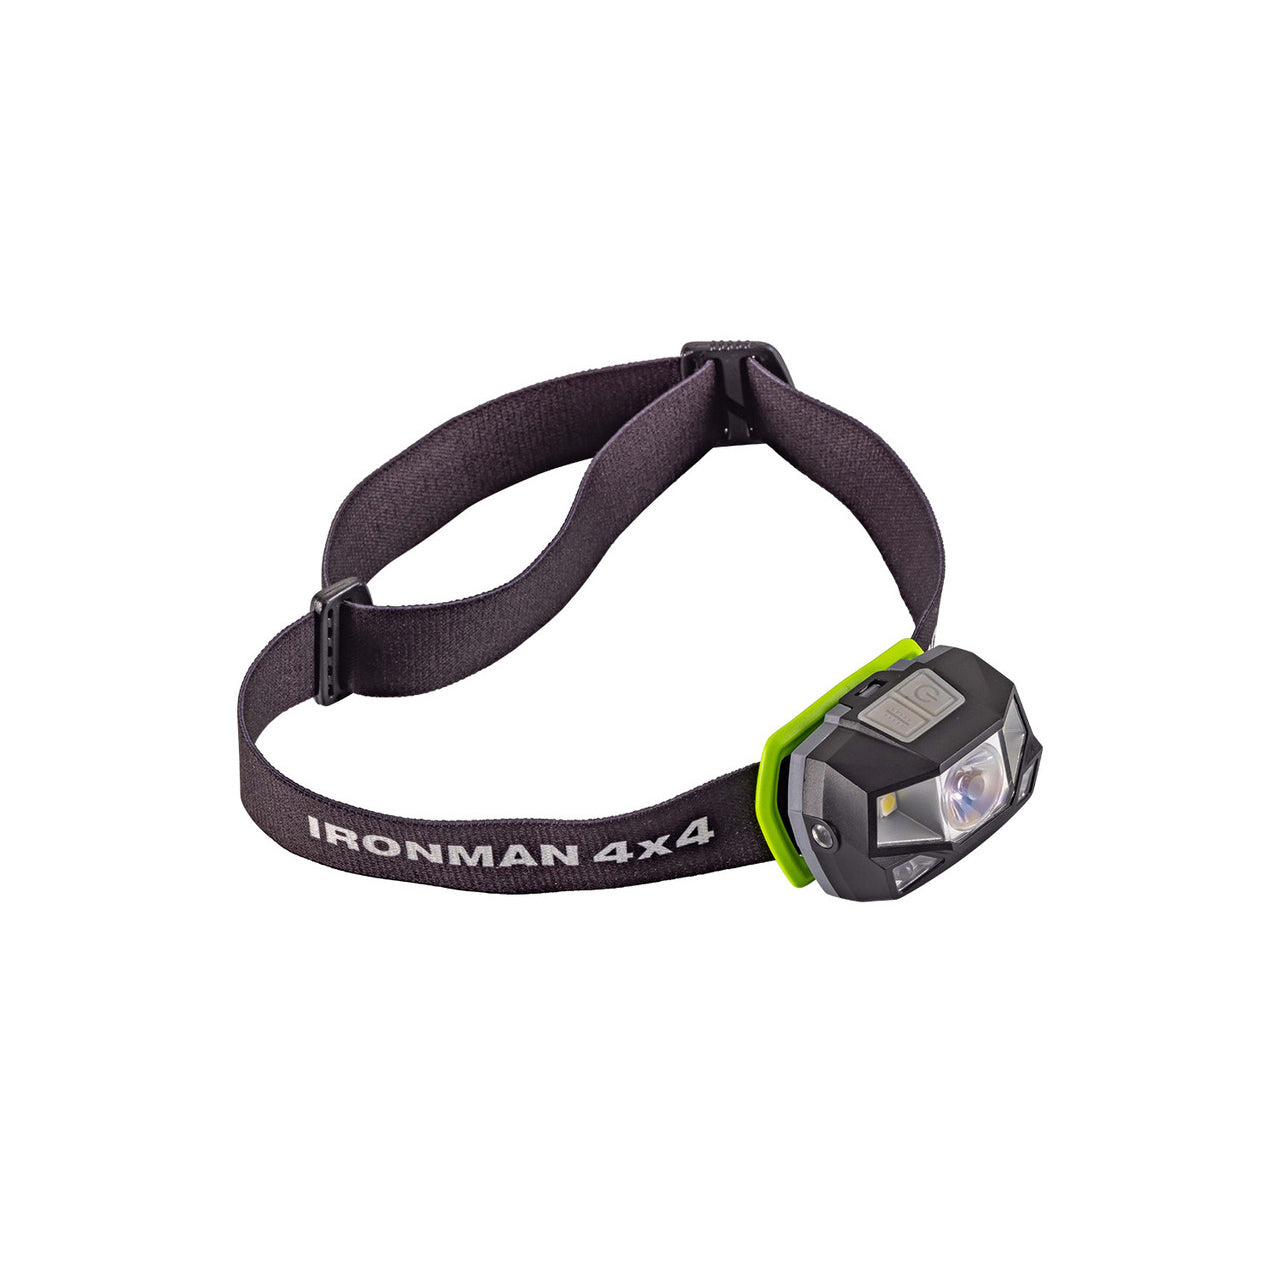 RECHARGEABLE LED HEADLAMP